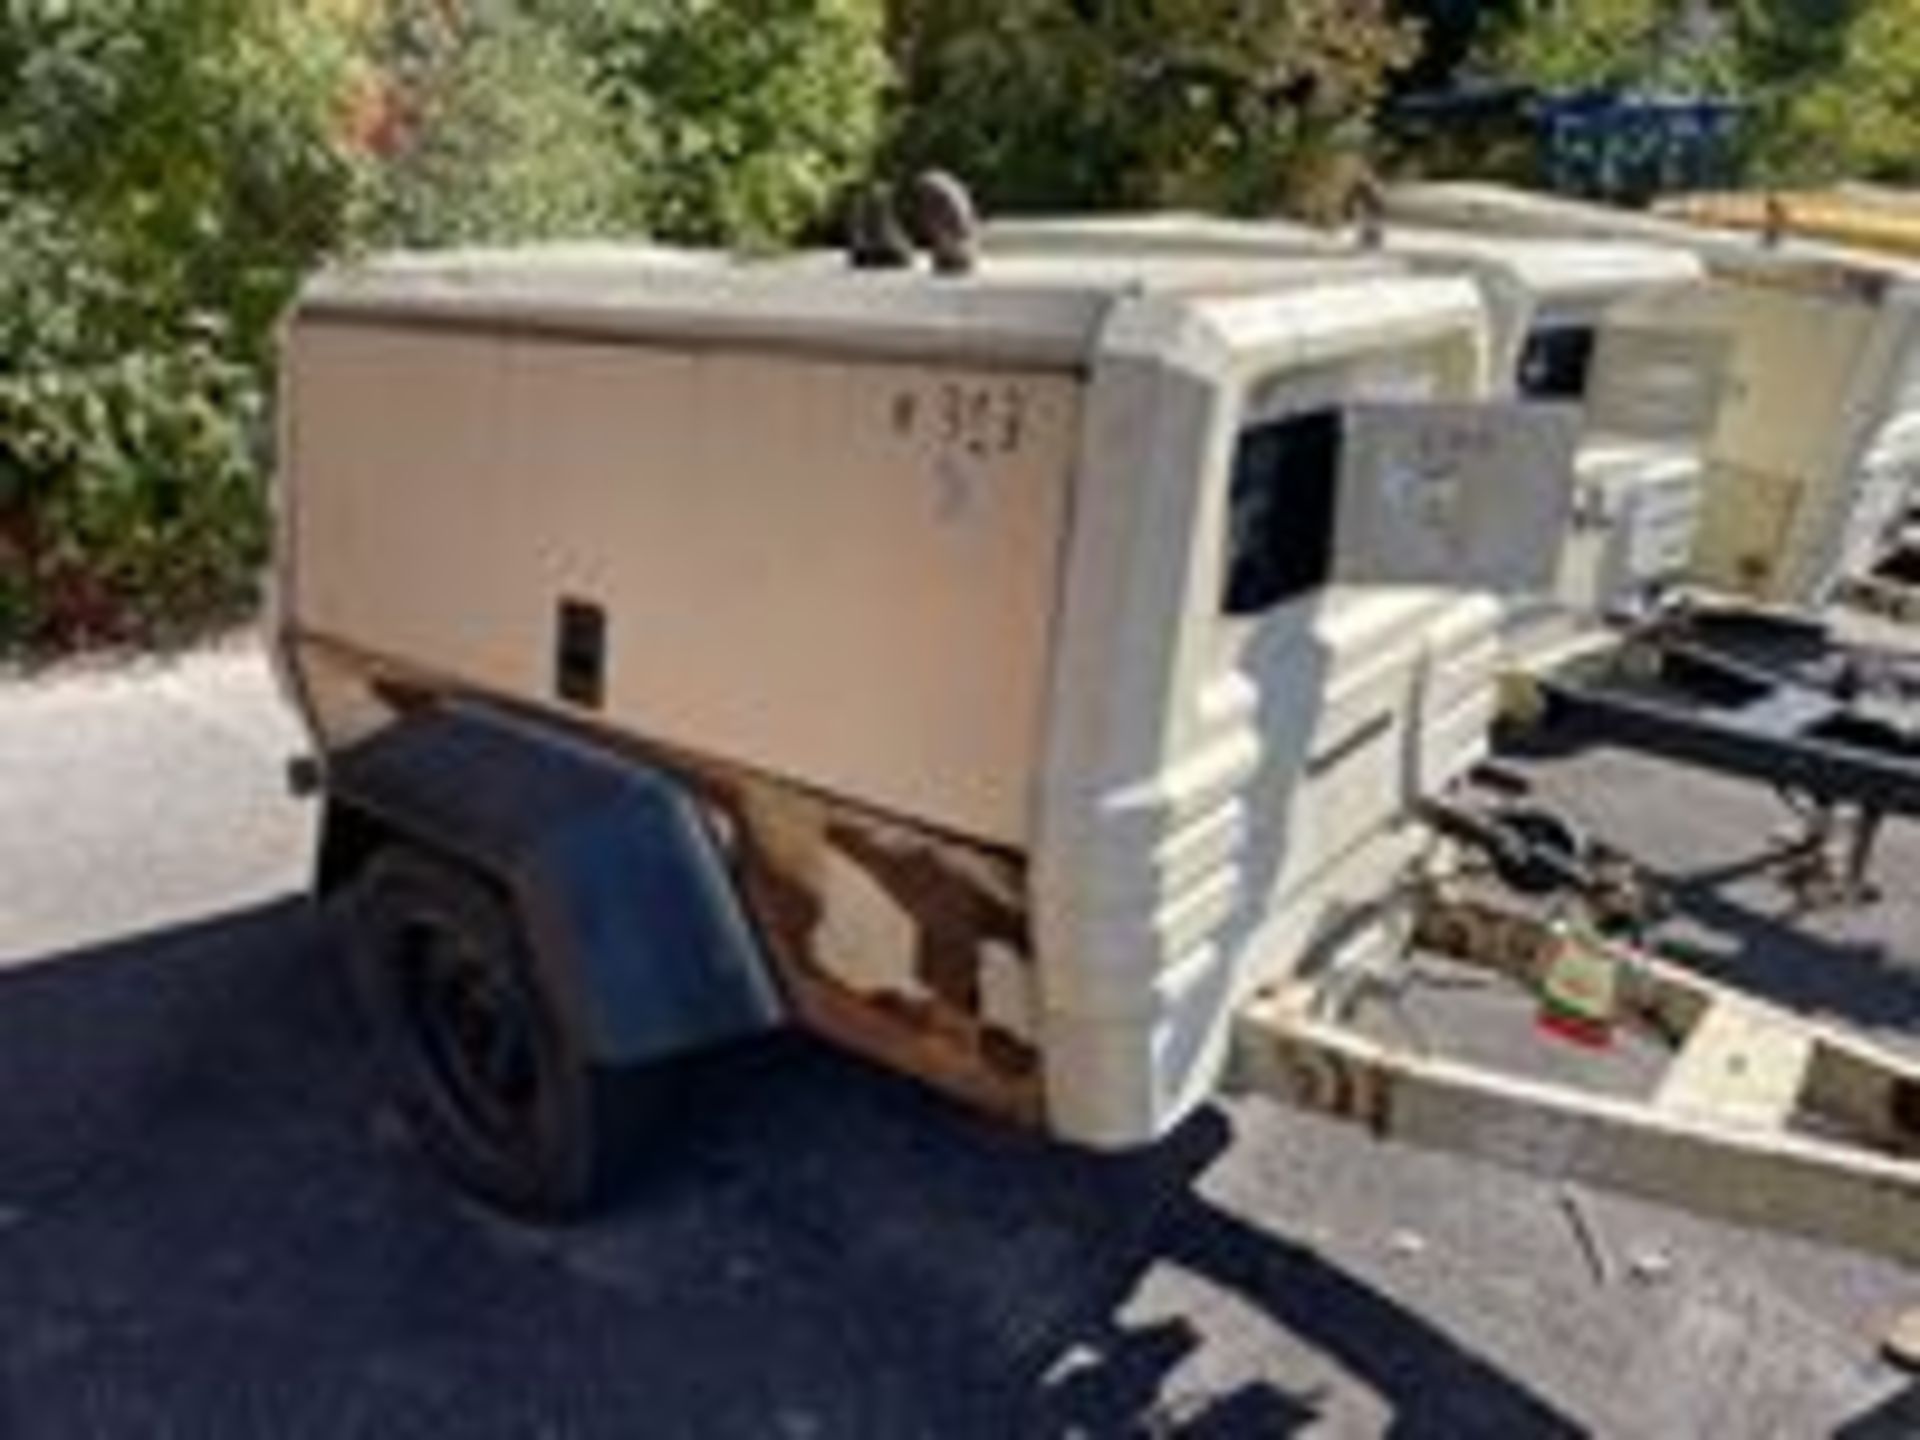 2003 Ingersoll Rand 185 Towable Air Compressor, Pintle Hitch, Hrs: 2,684, Vin#: 335269UBN221(DEAD BA - Image 7 of 11